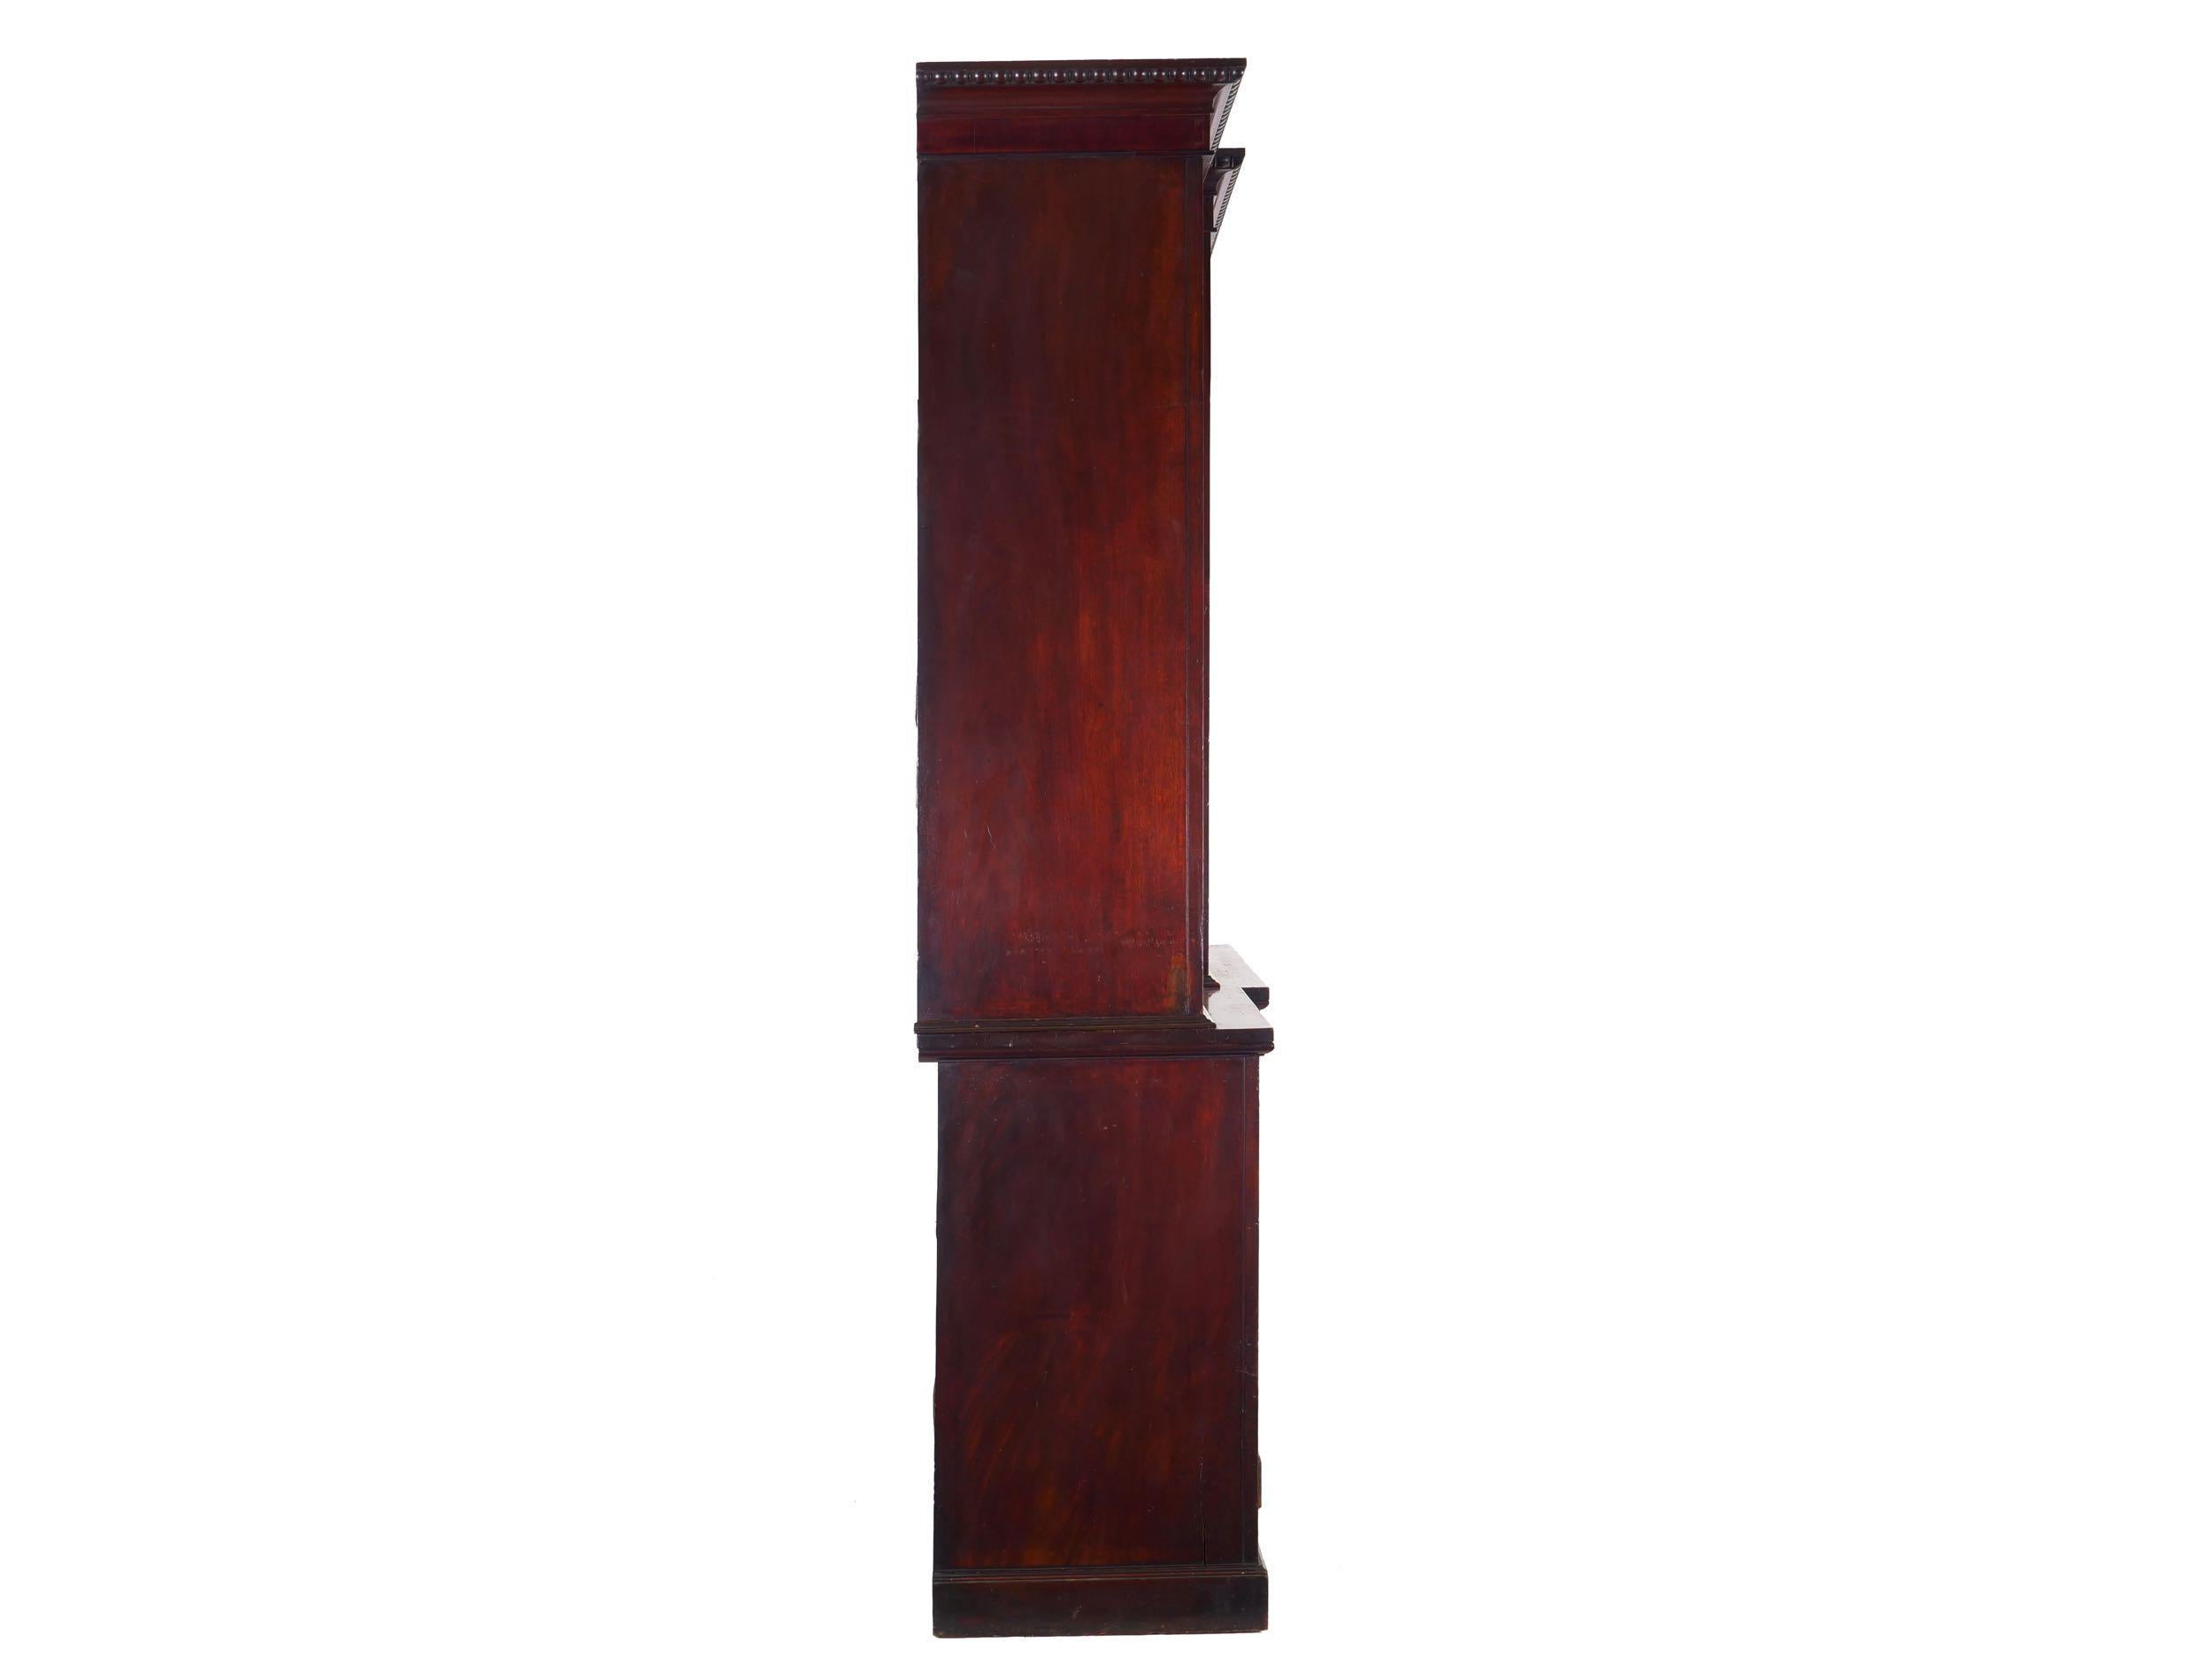 A rich and vibrant library bookcase from the second quarter of the 19th century, it is difficult for pictures to capture just how attractive the mahogany is throughout the case. It retains an early cognac finish under shellac that simply glows, the